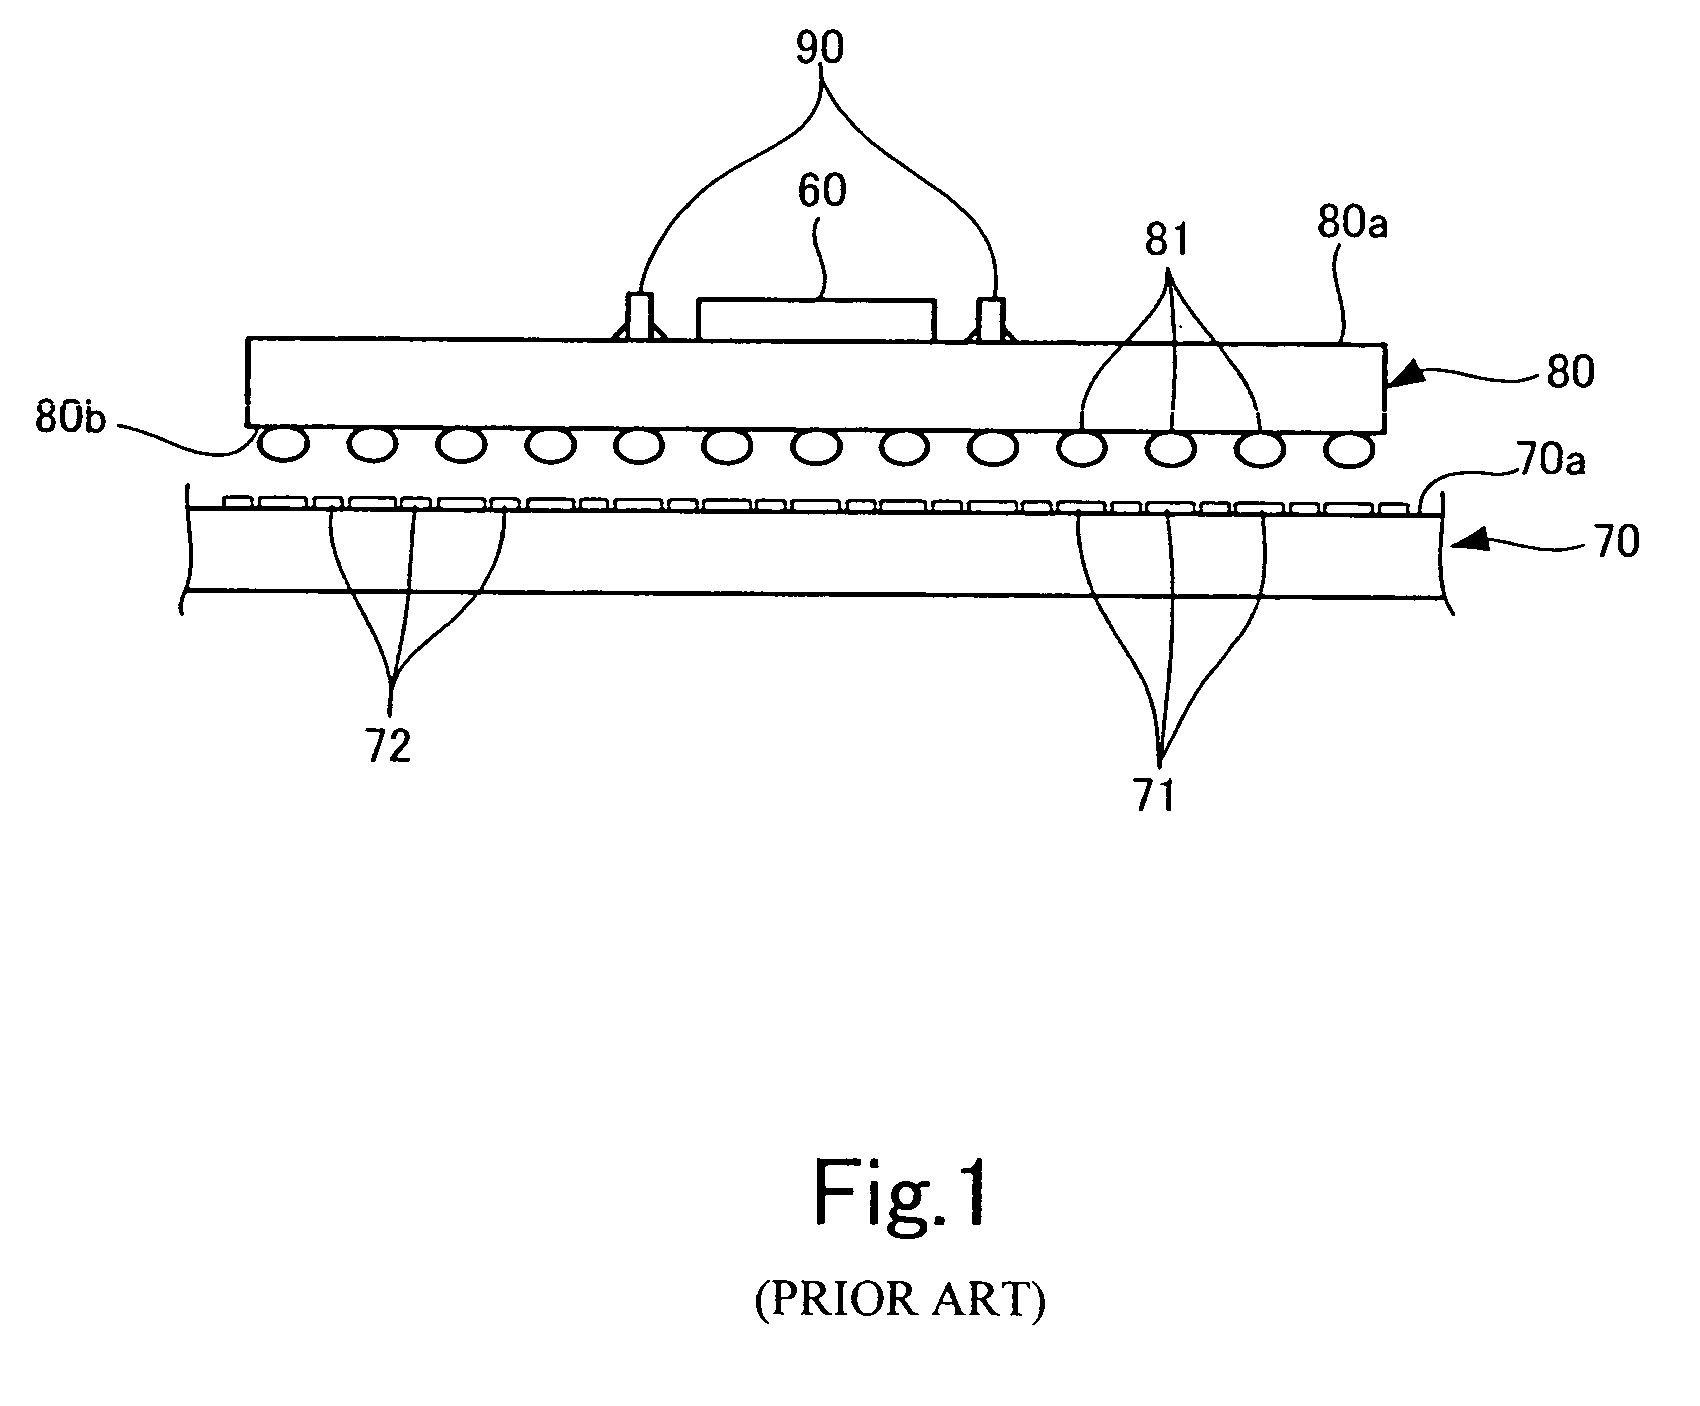 Circuit substrate and electronic equipment